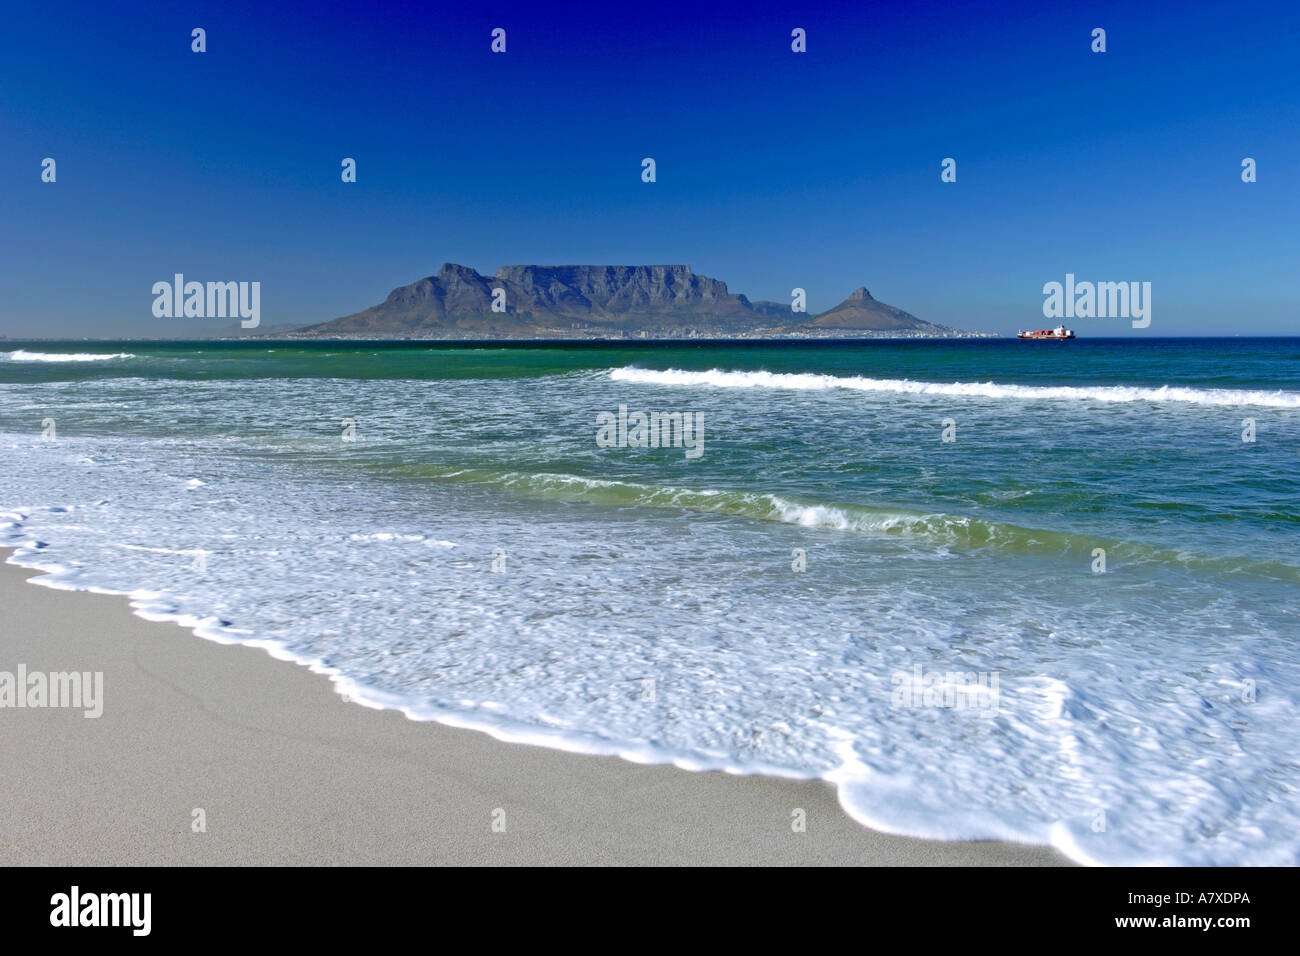 A view of Table Mountain and the city of Cape Town seen across Table bay from Bloubergstrand beach. Stock Photo